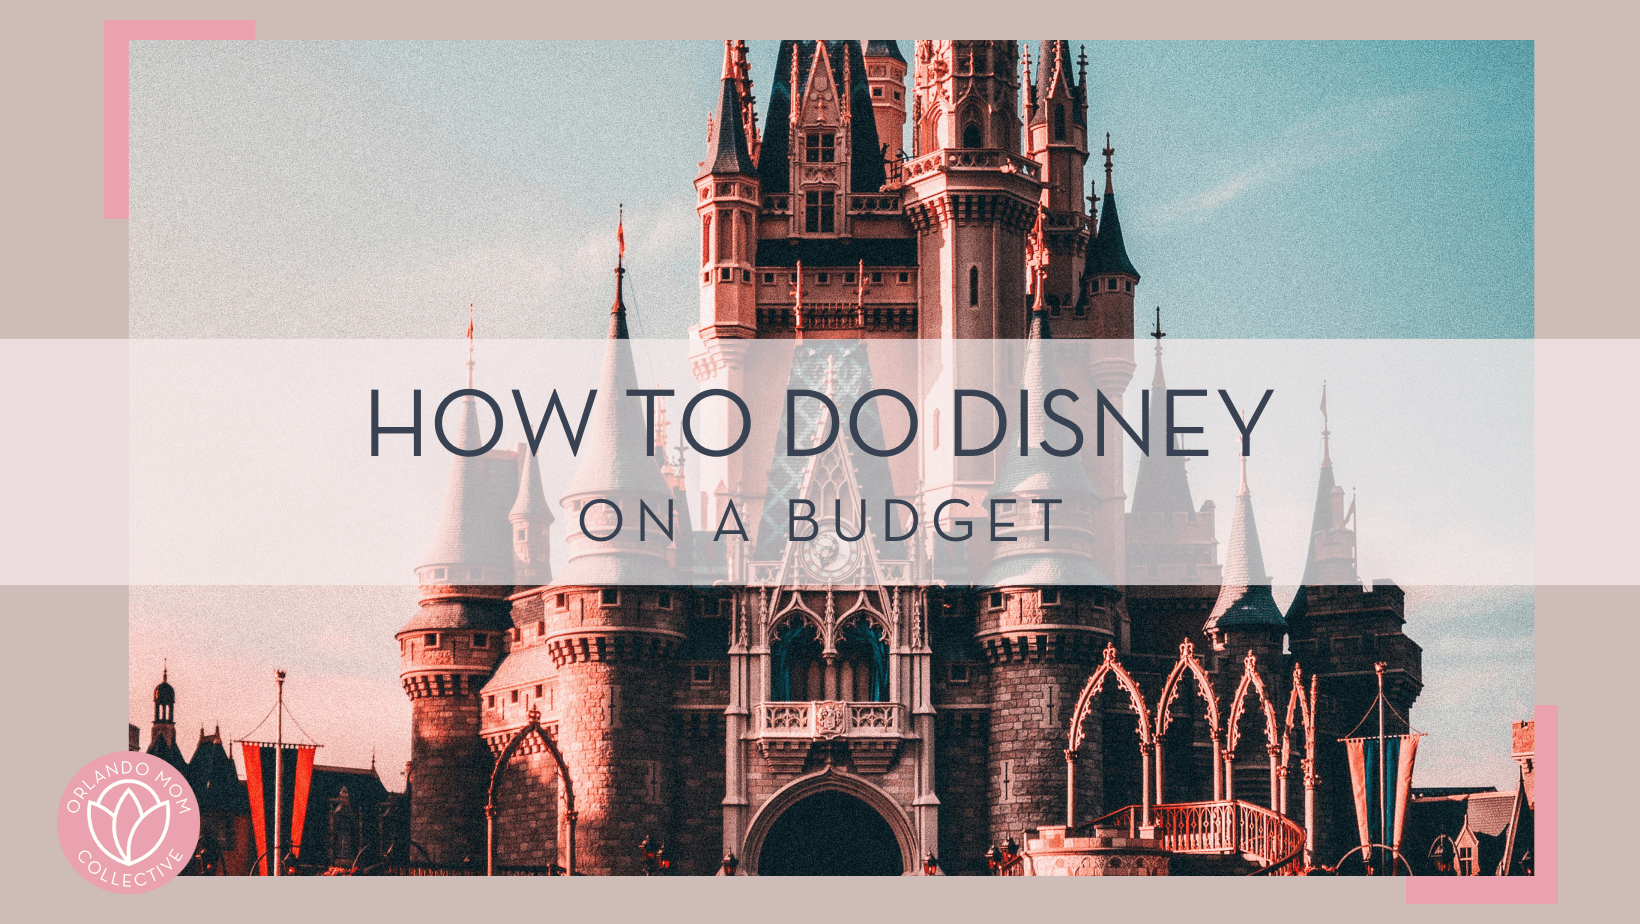 Benjamin suter via unsplash of cinderella castle with words 'how to do disney on a budget' in text overtop of the image.